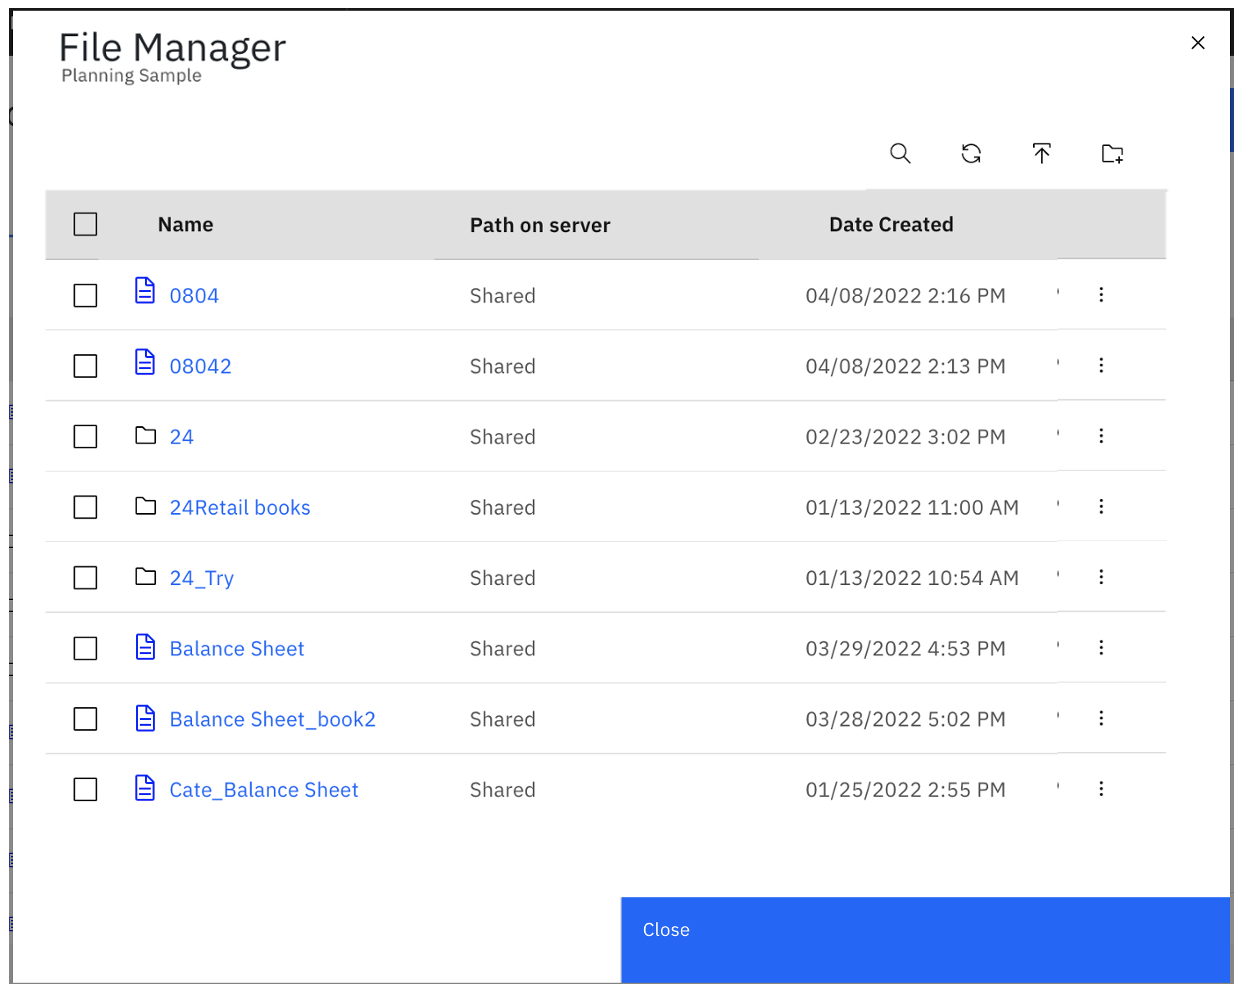 File manager showing files and options